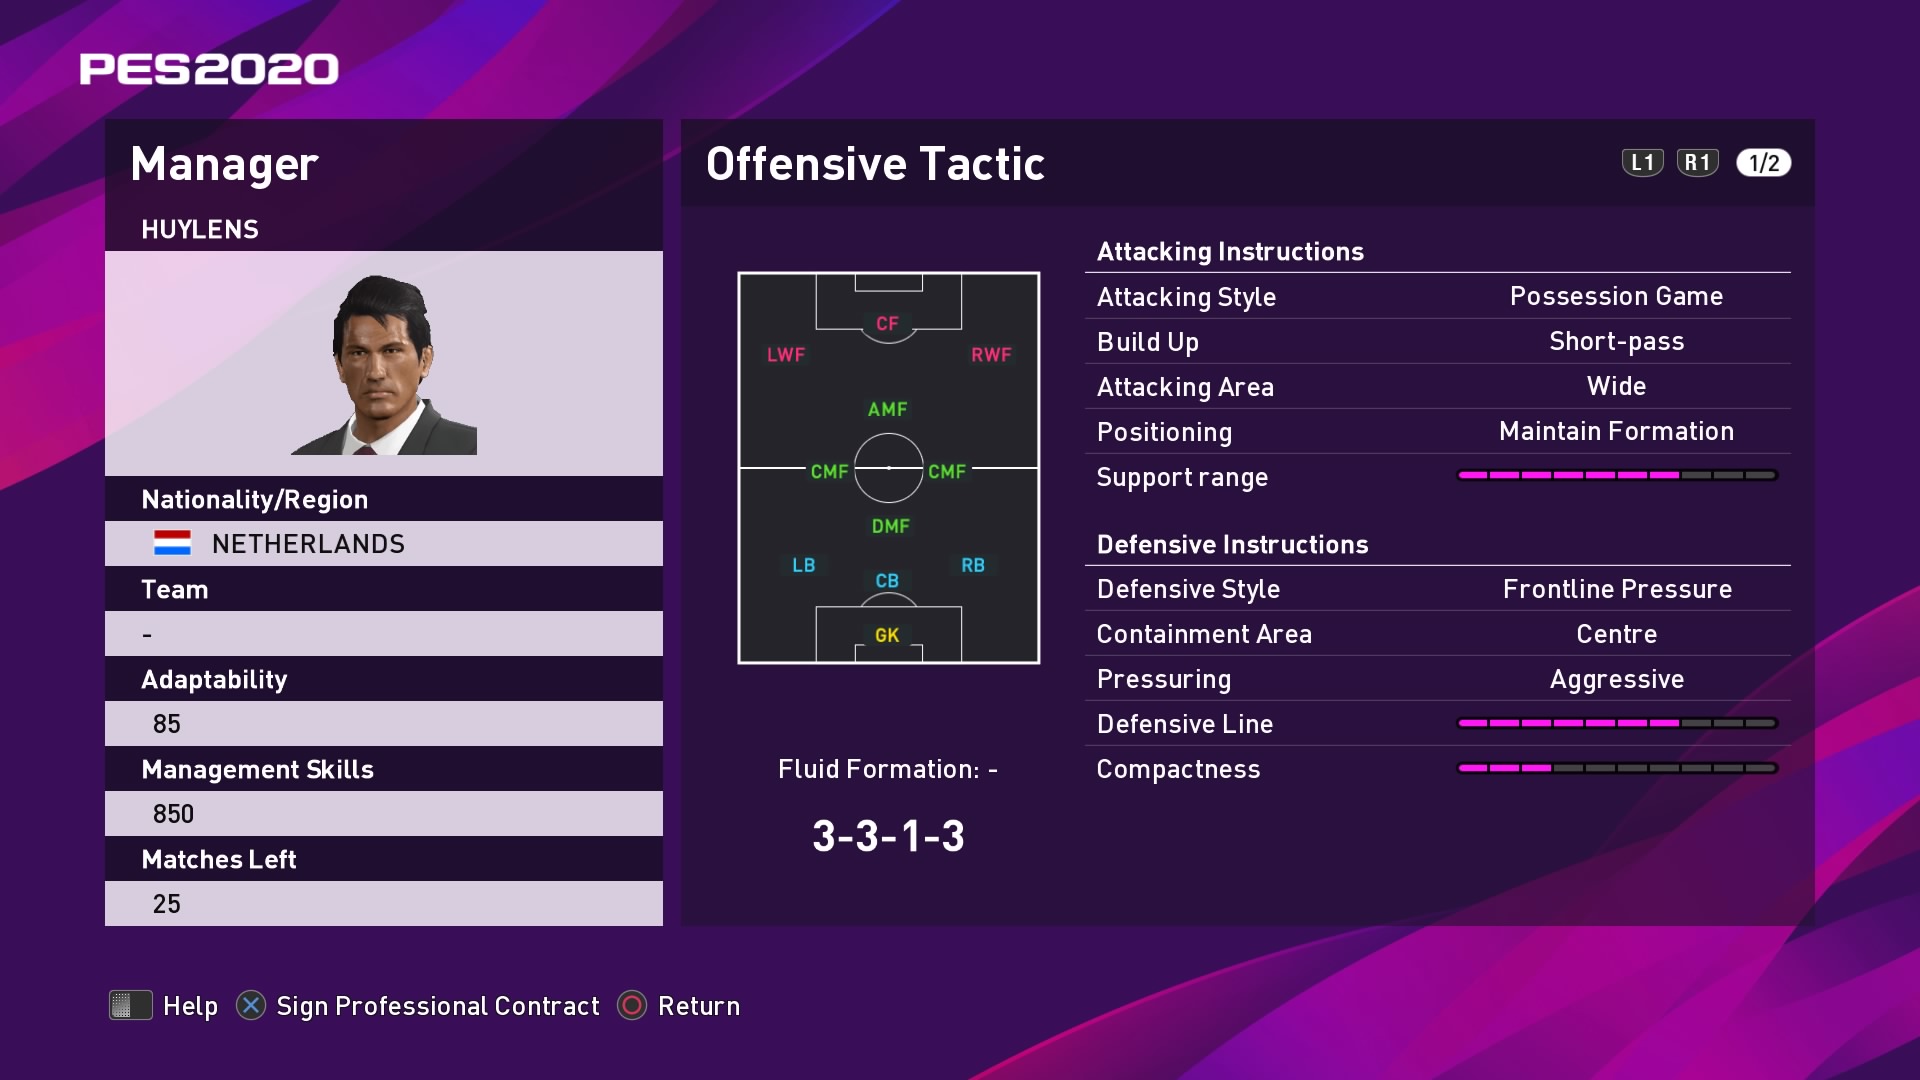 Huylens Offensive Tactic in PES 2020 myClub